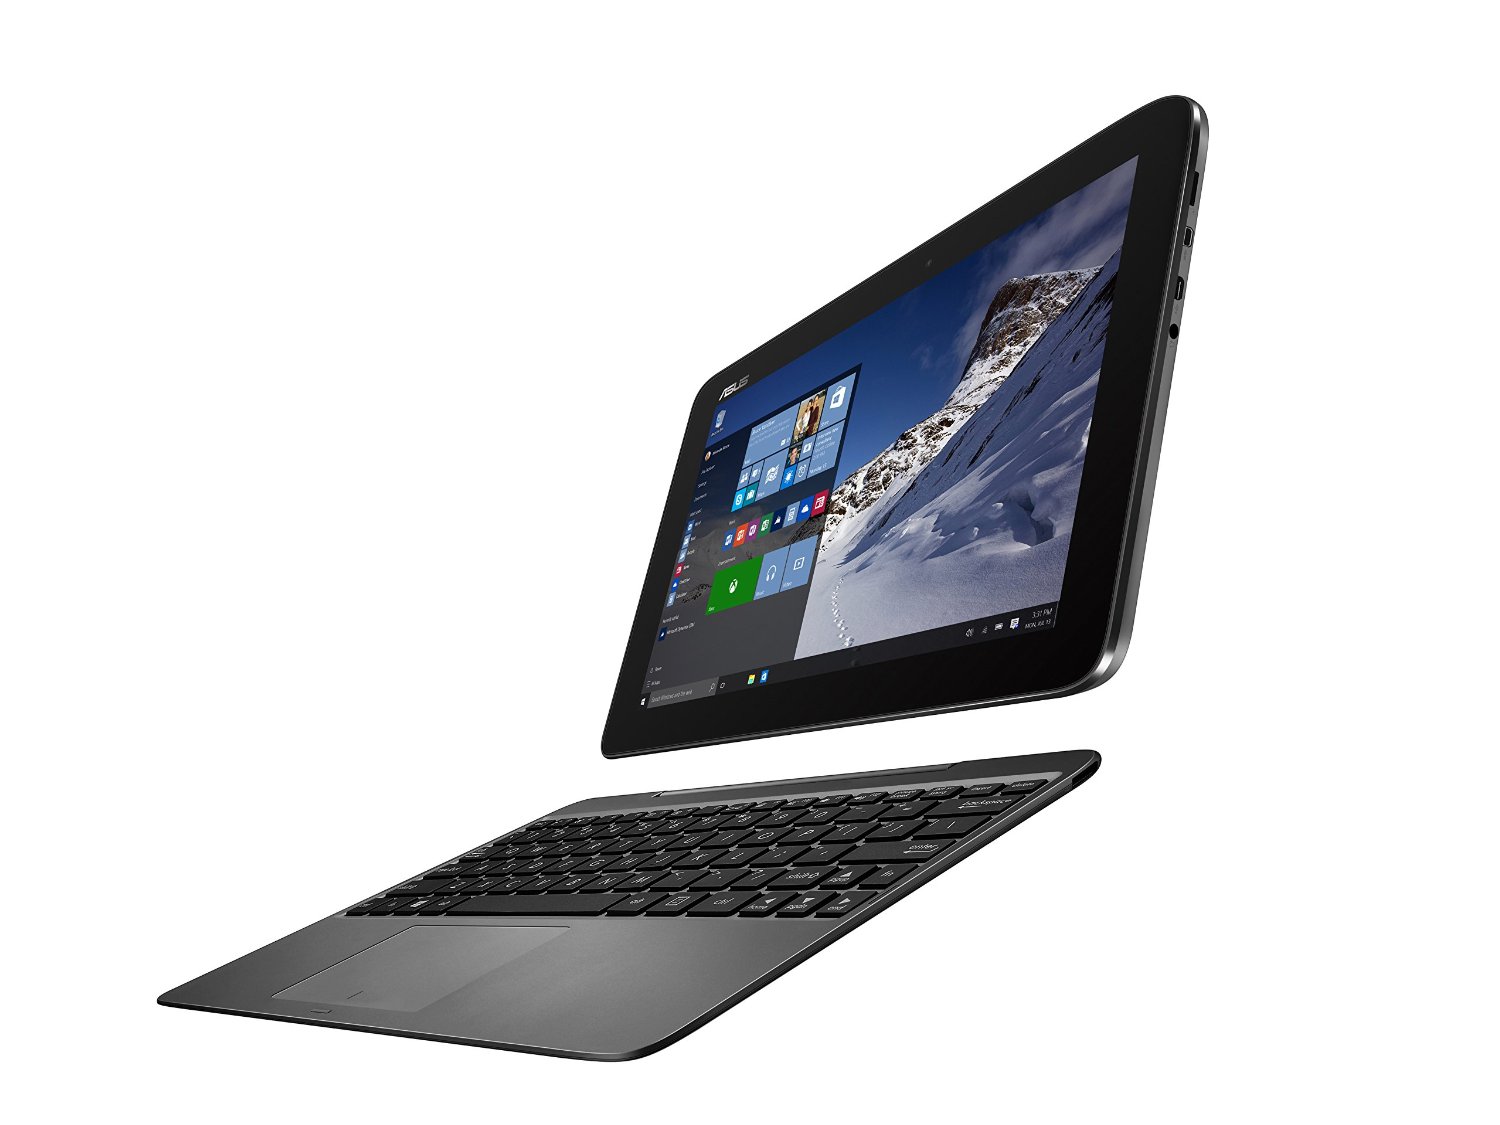 Asus-Transformer-Book-T100HA-with-detachable-Keyboard